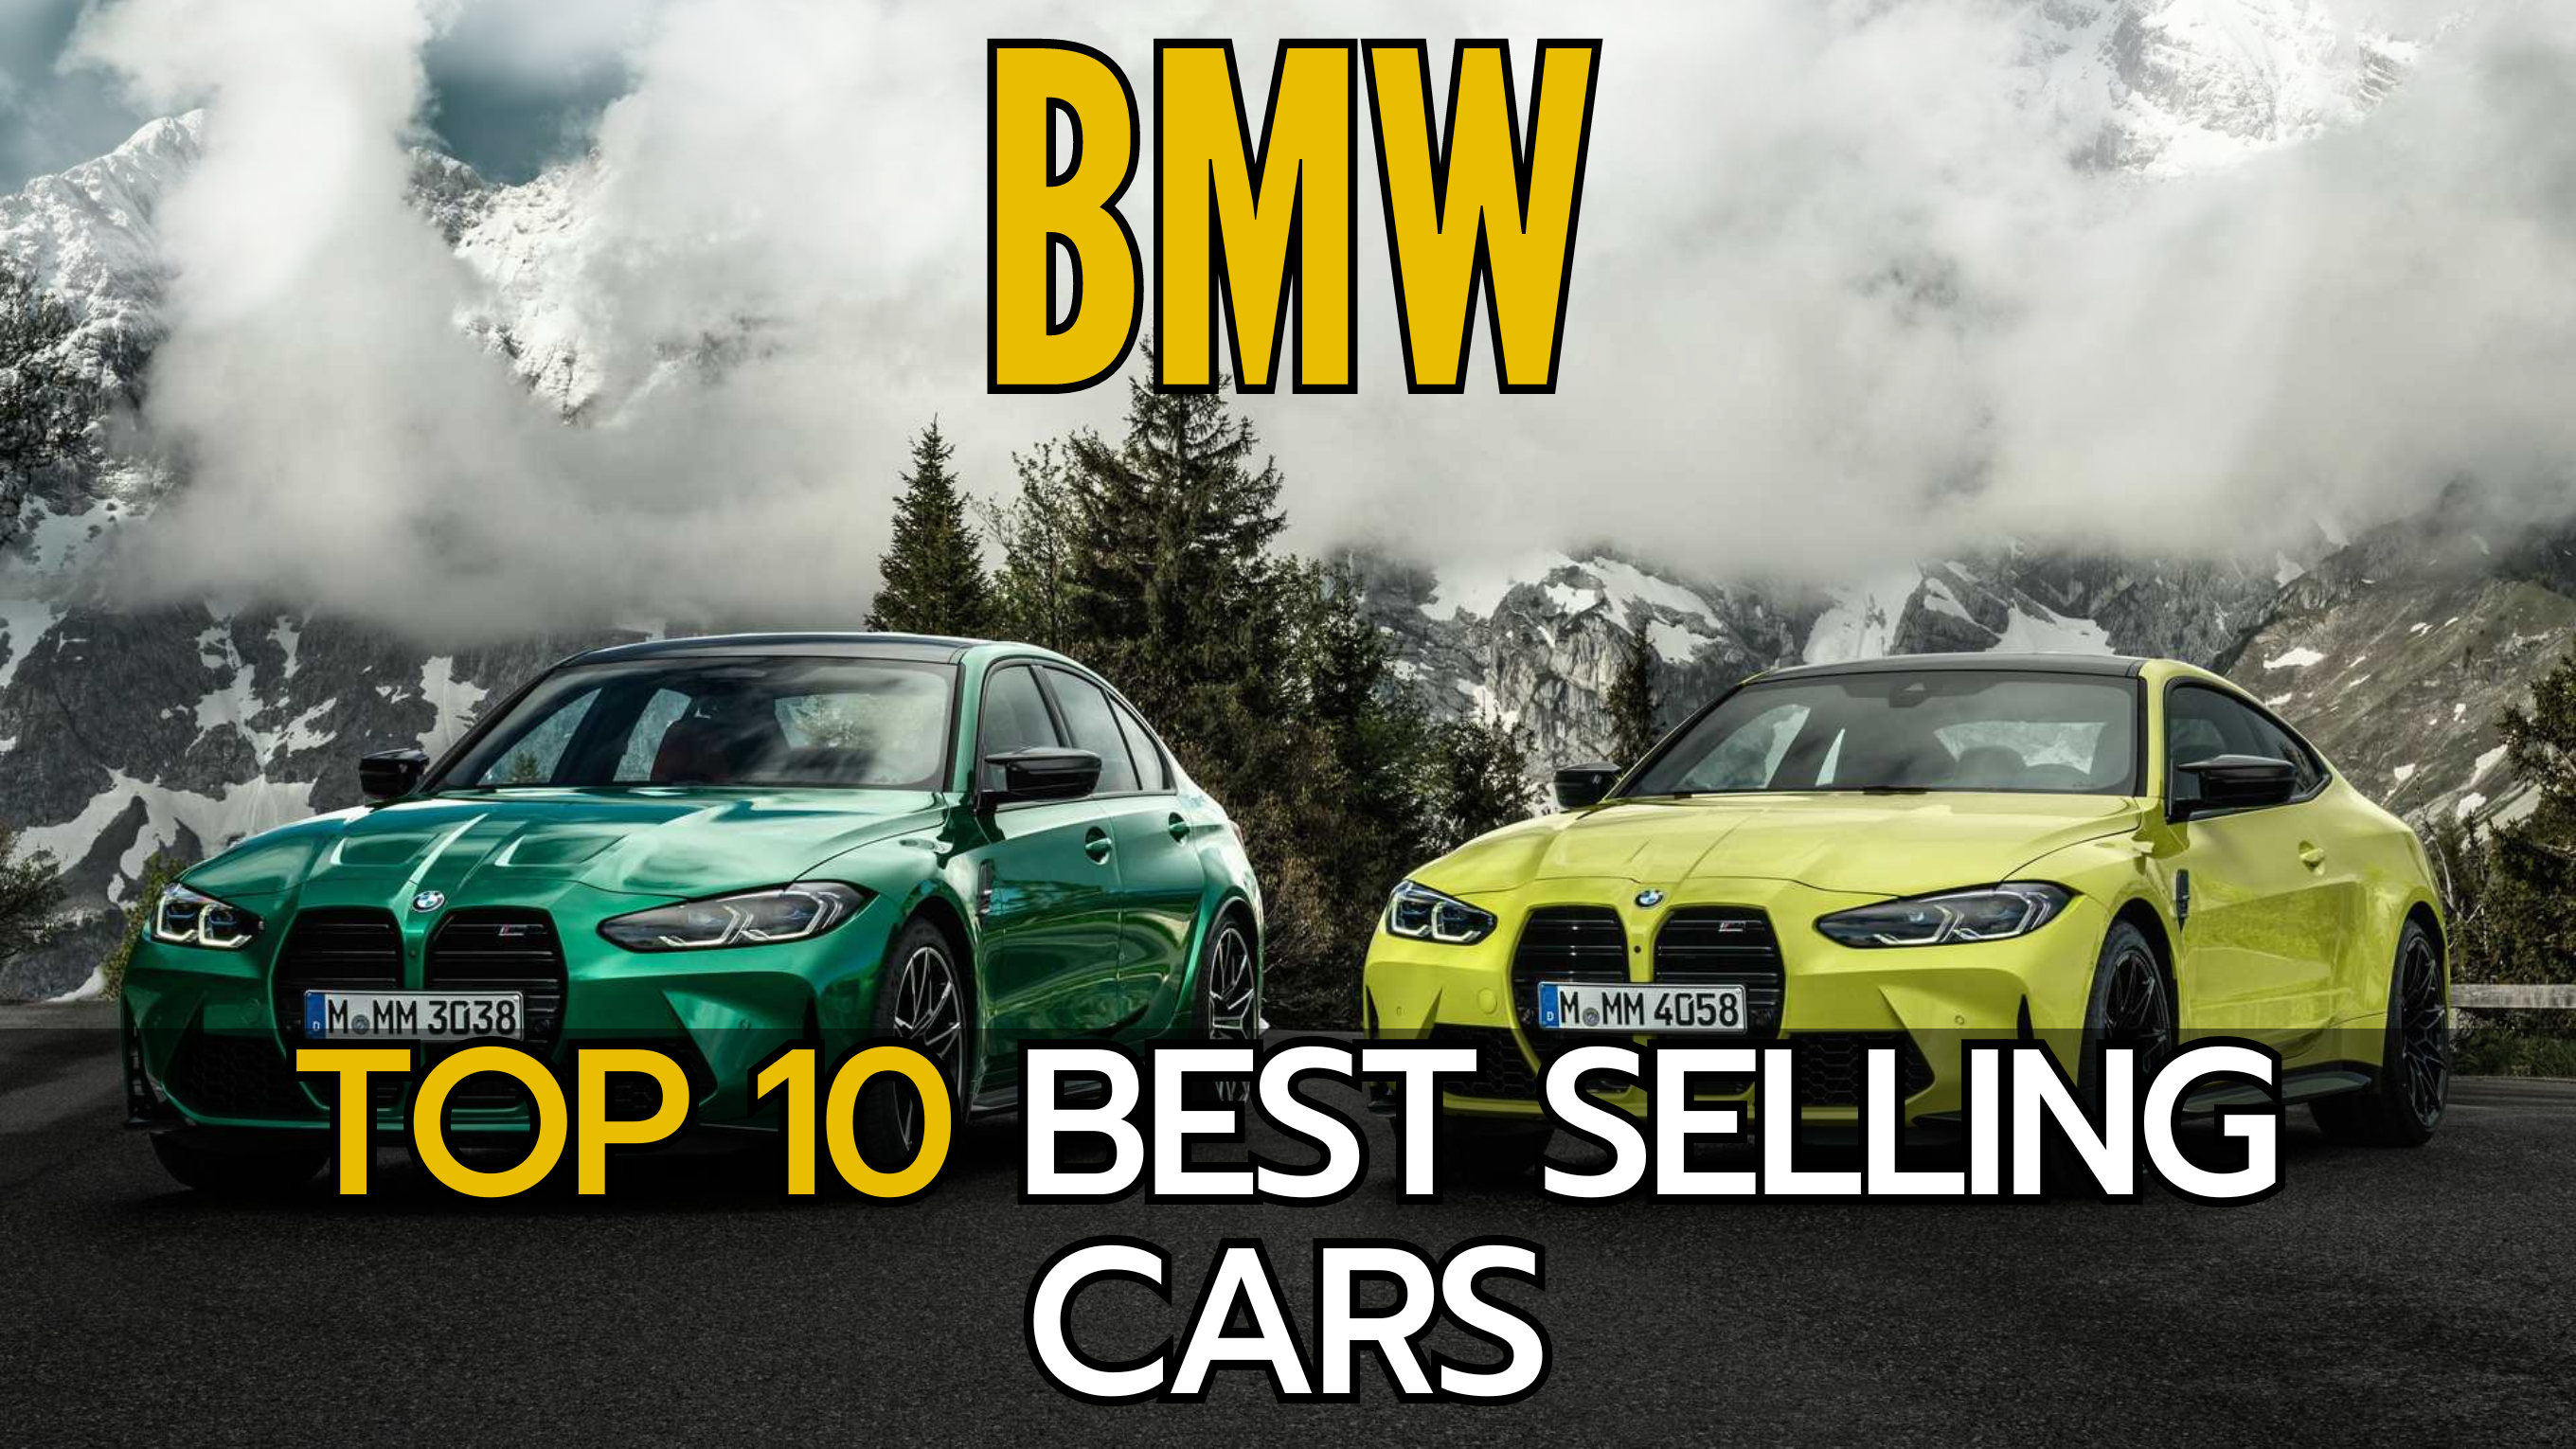 BMW Top 10 Best Selling Cars